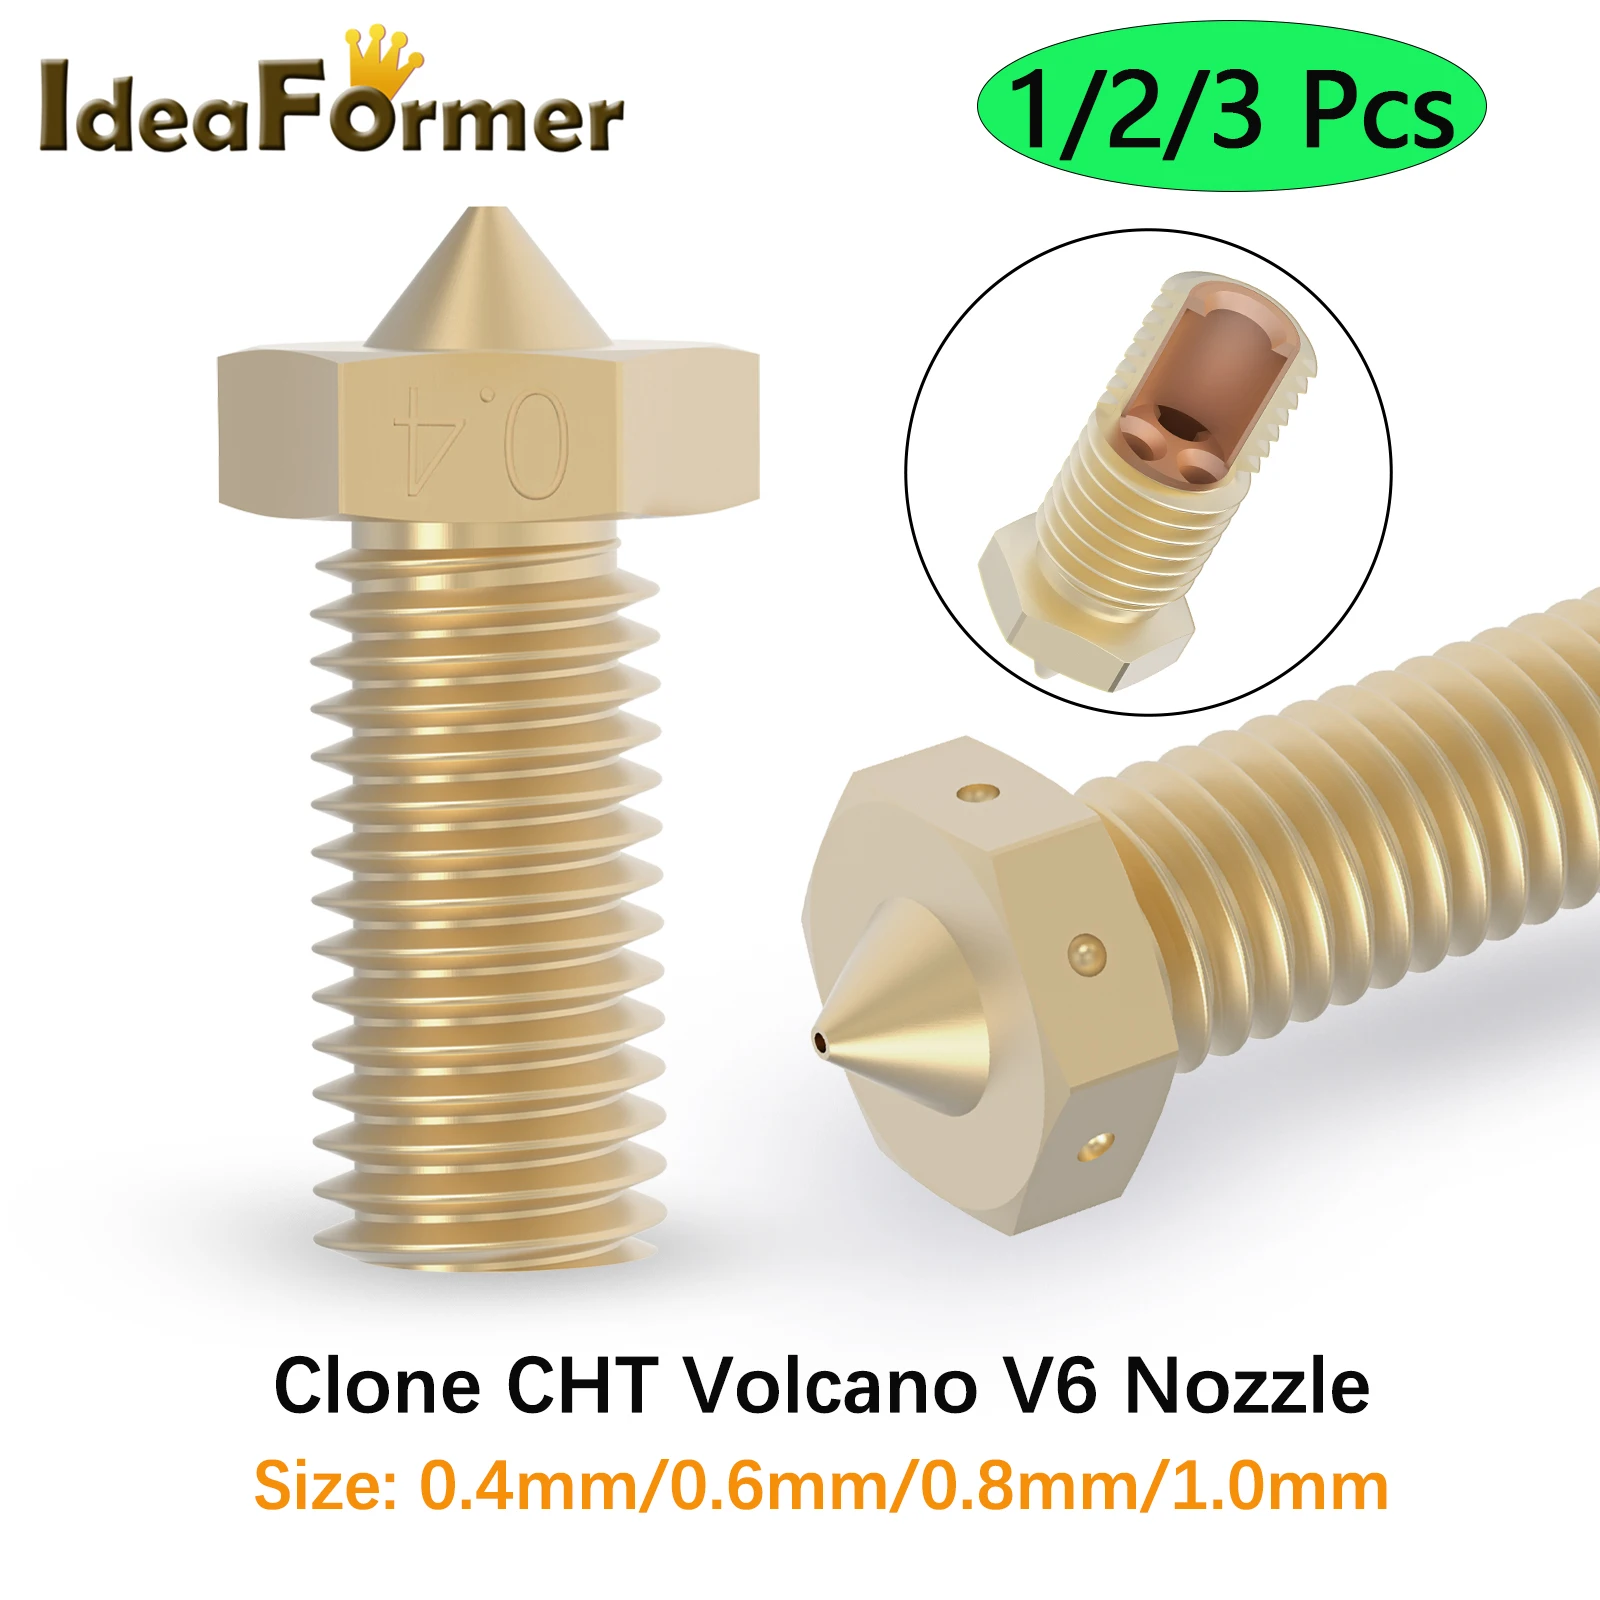 CHT Volcano Nozzle 0.4mm Brass Nozzle High Flow Three-eyes Print Head for Anycubic Vyper,Kobra Max 1.75mm 3D Printer Accessories